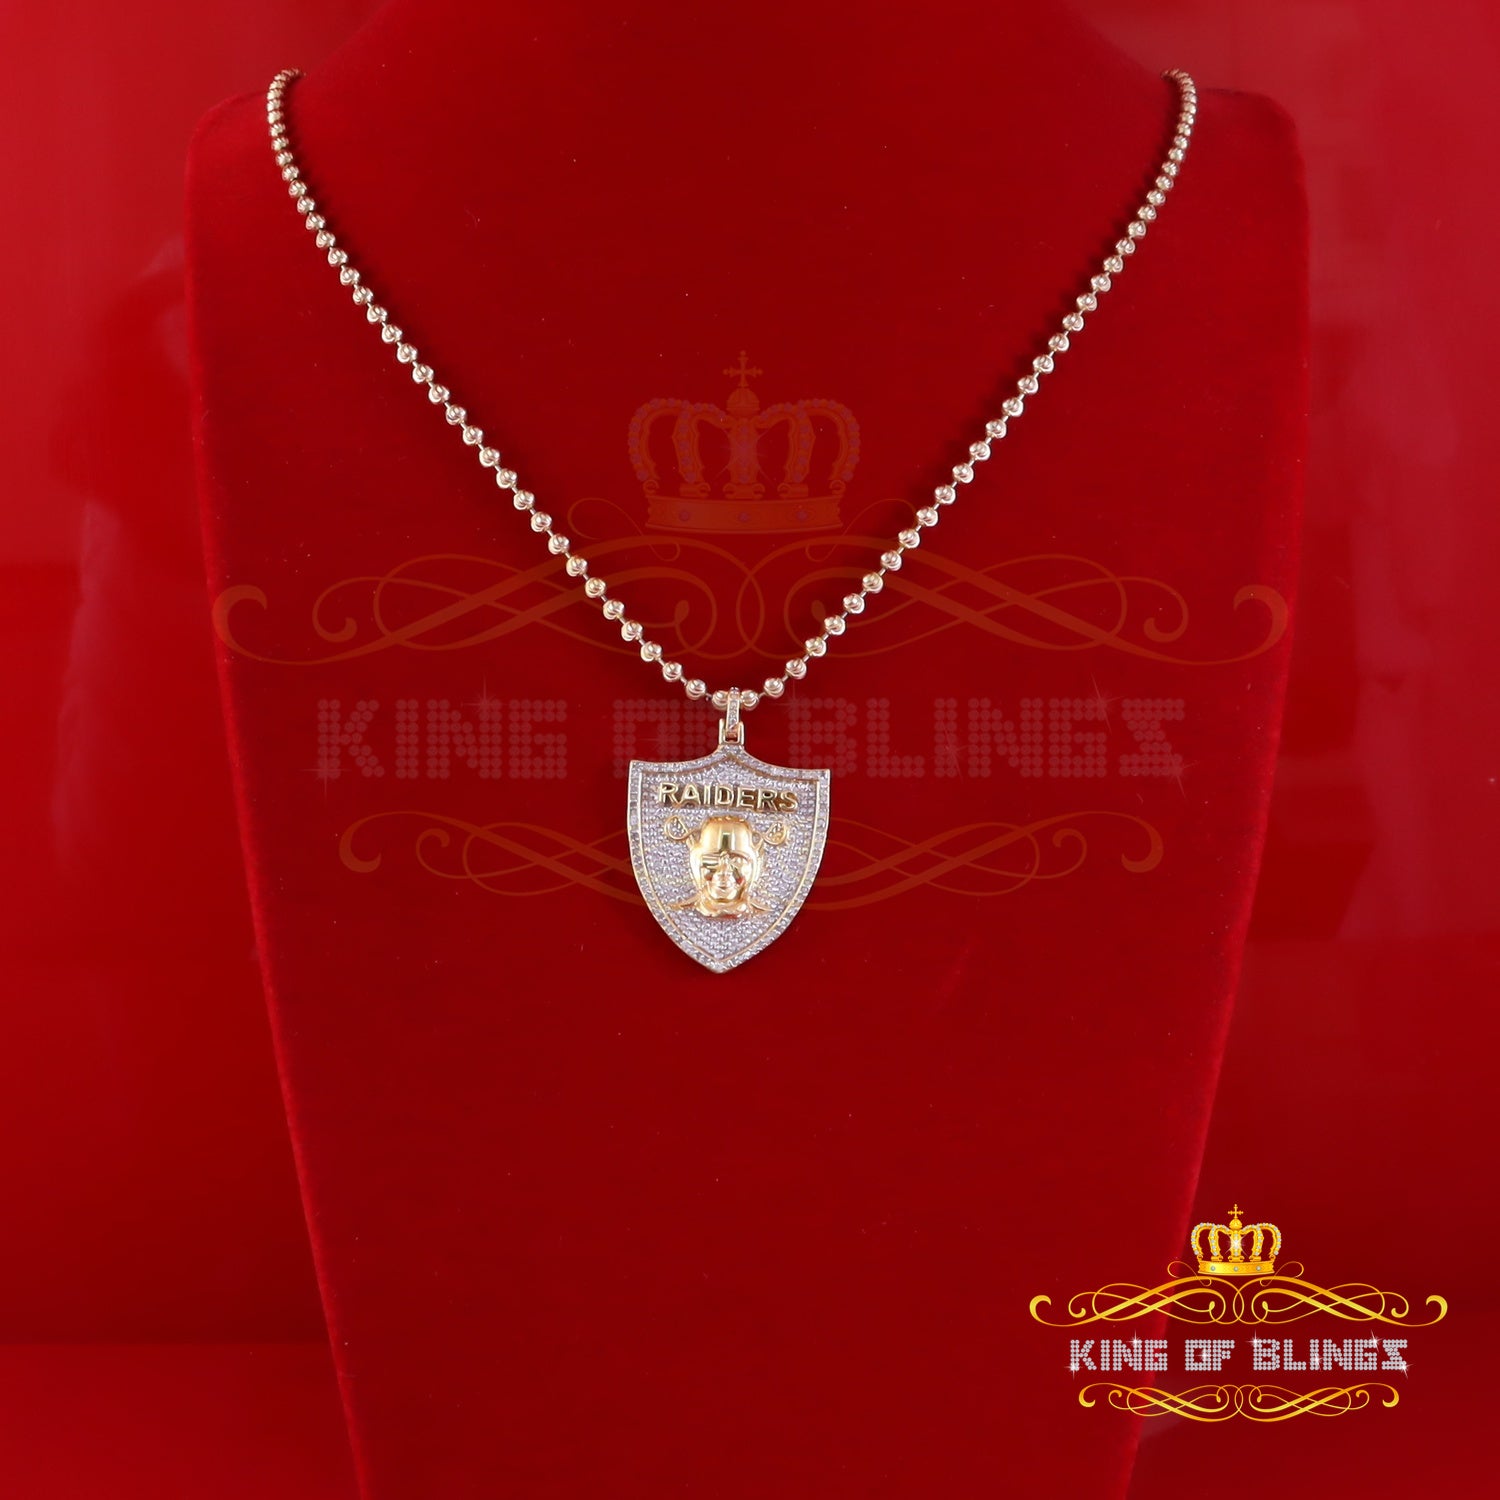 King Of Bling's RIDER SHIELD Charm Real 0.33ct Diamond Sterling Silver Necklace Yellow Pendant KING OF BLINGS